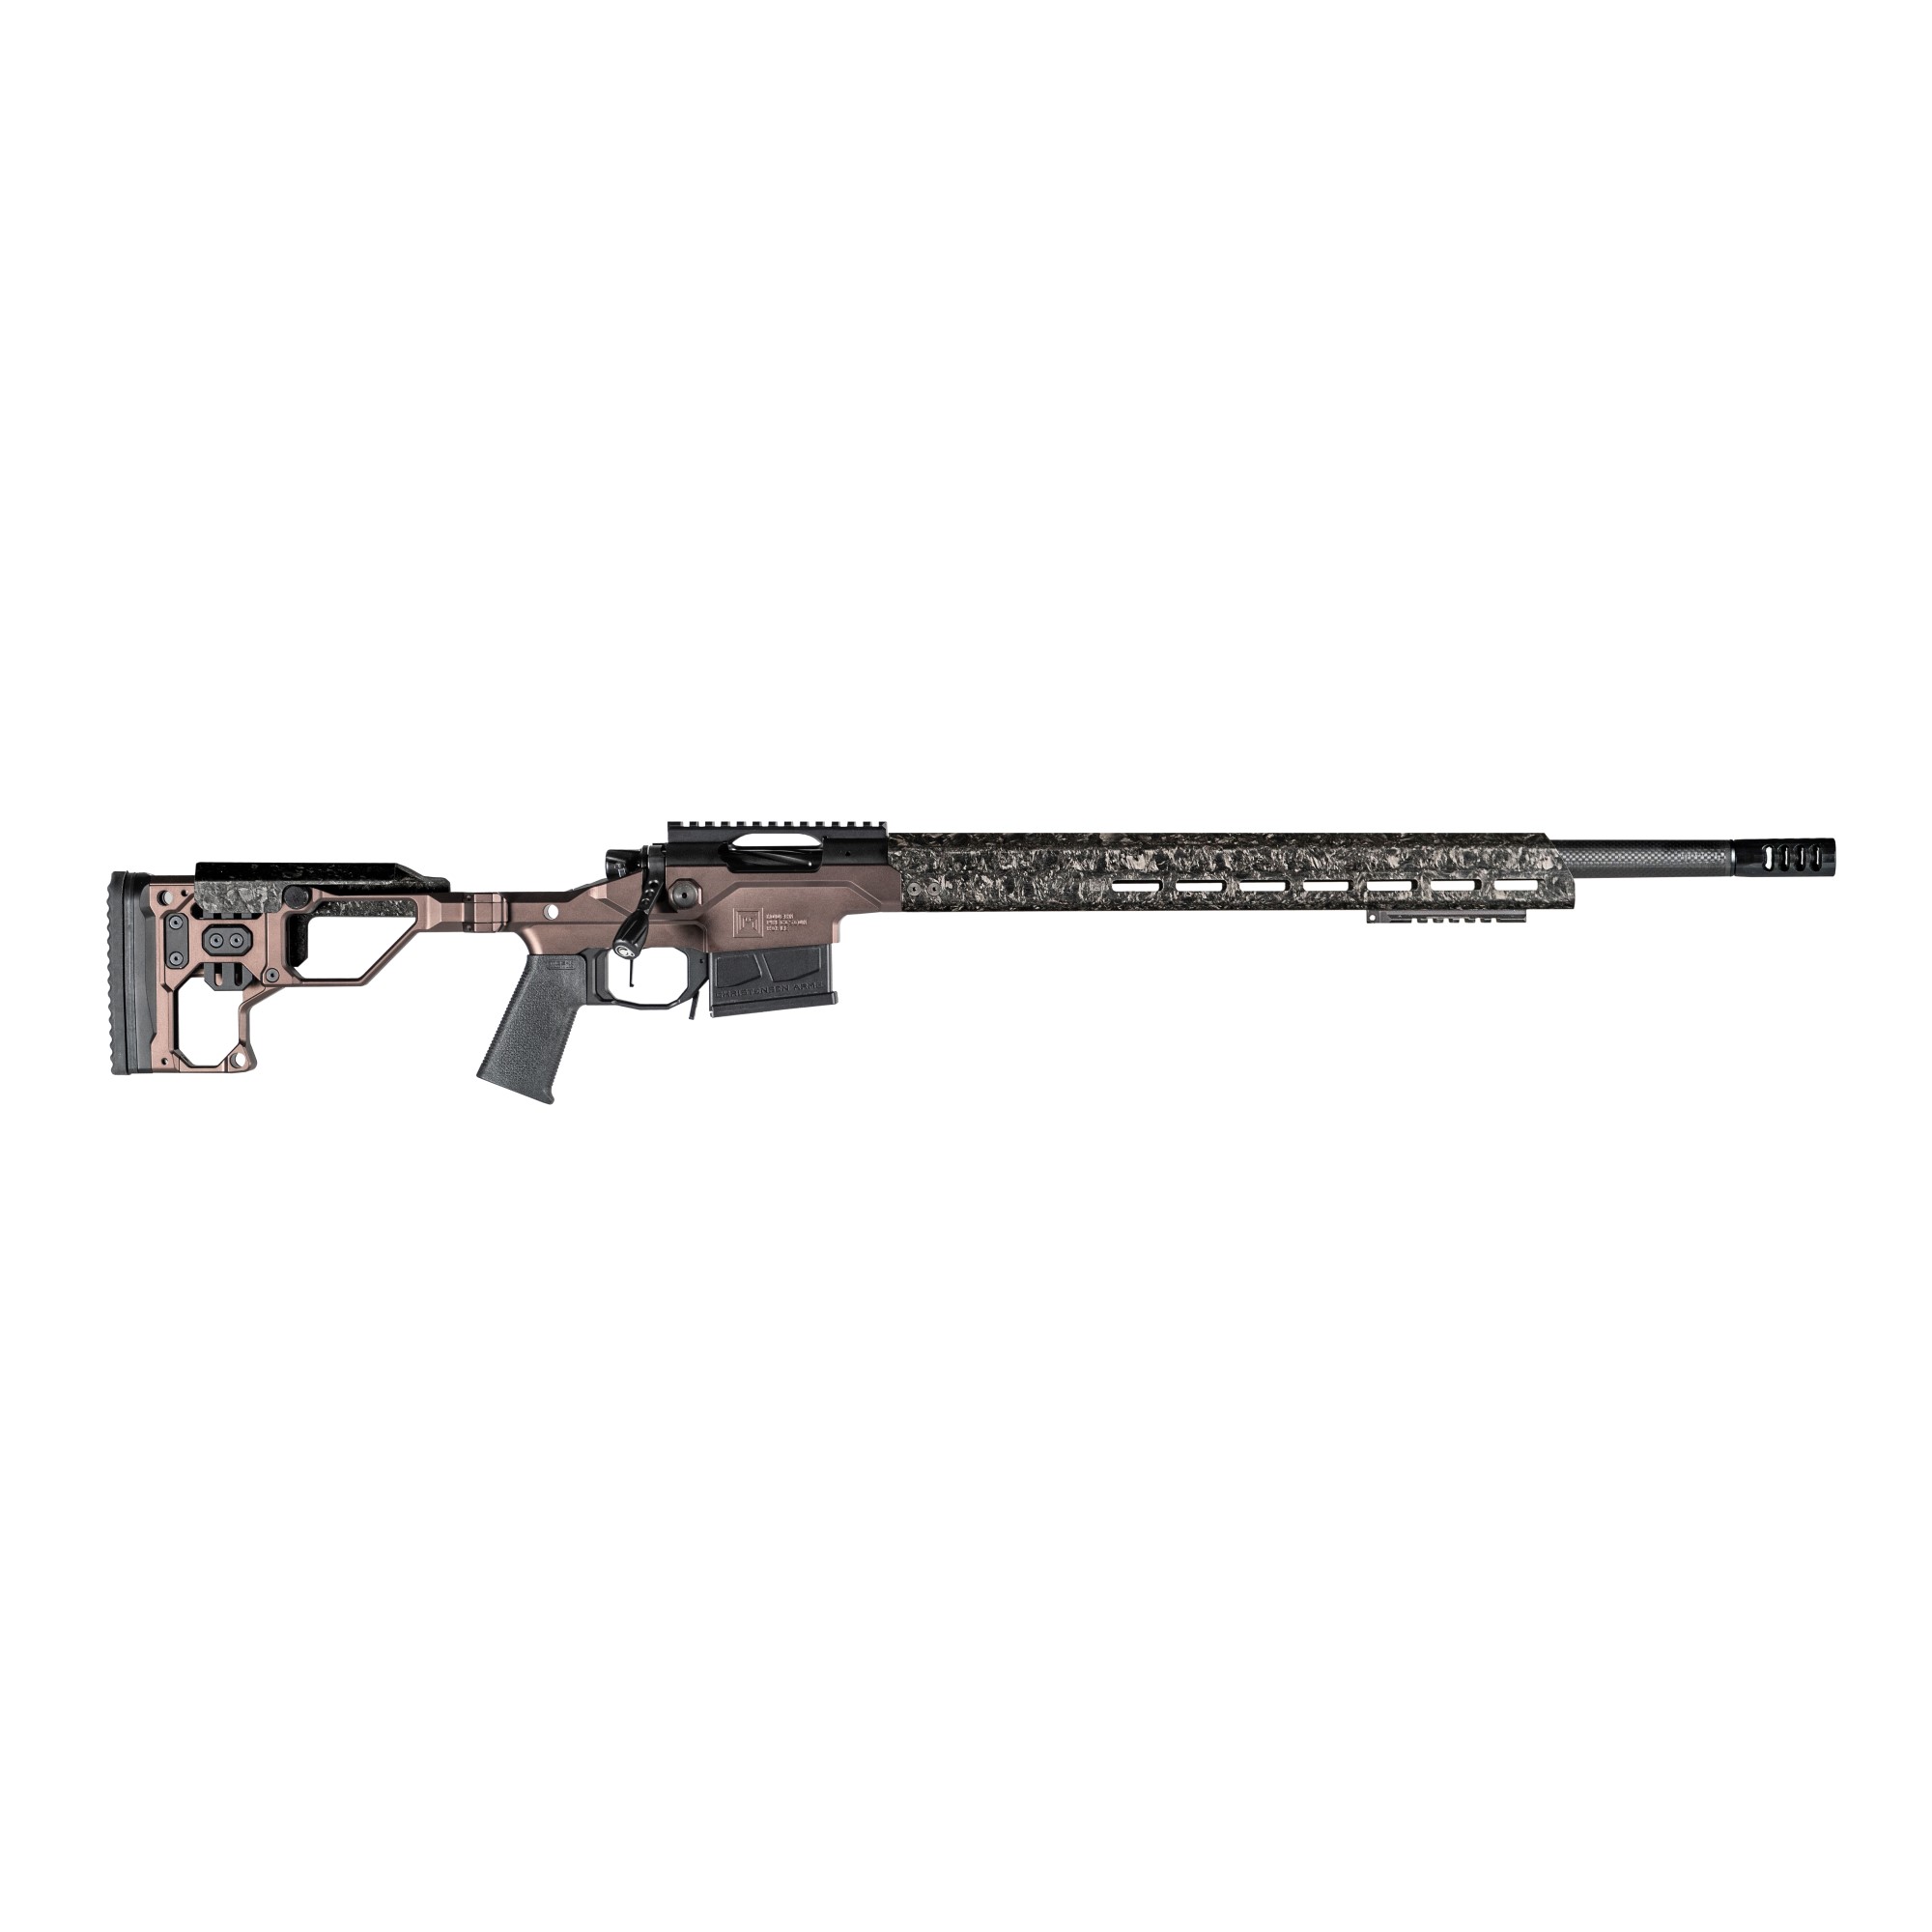 M12 BOLT-ACTION RIFLE, EXTREME NO SITES - 300 WIN MAG